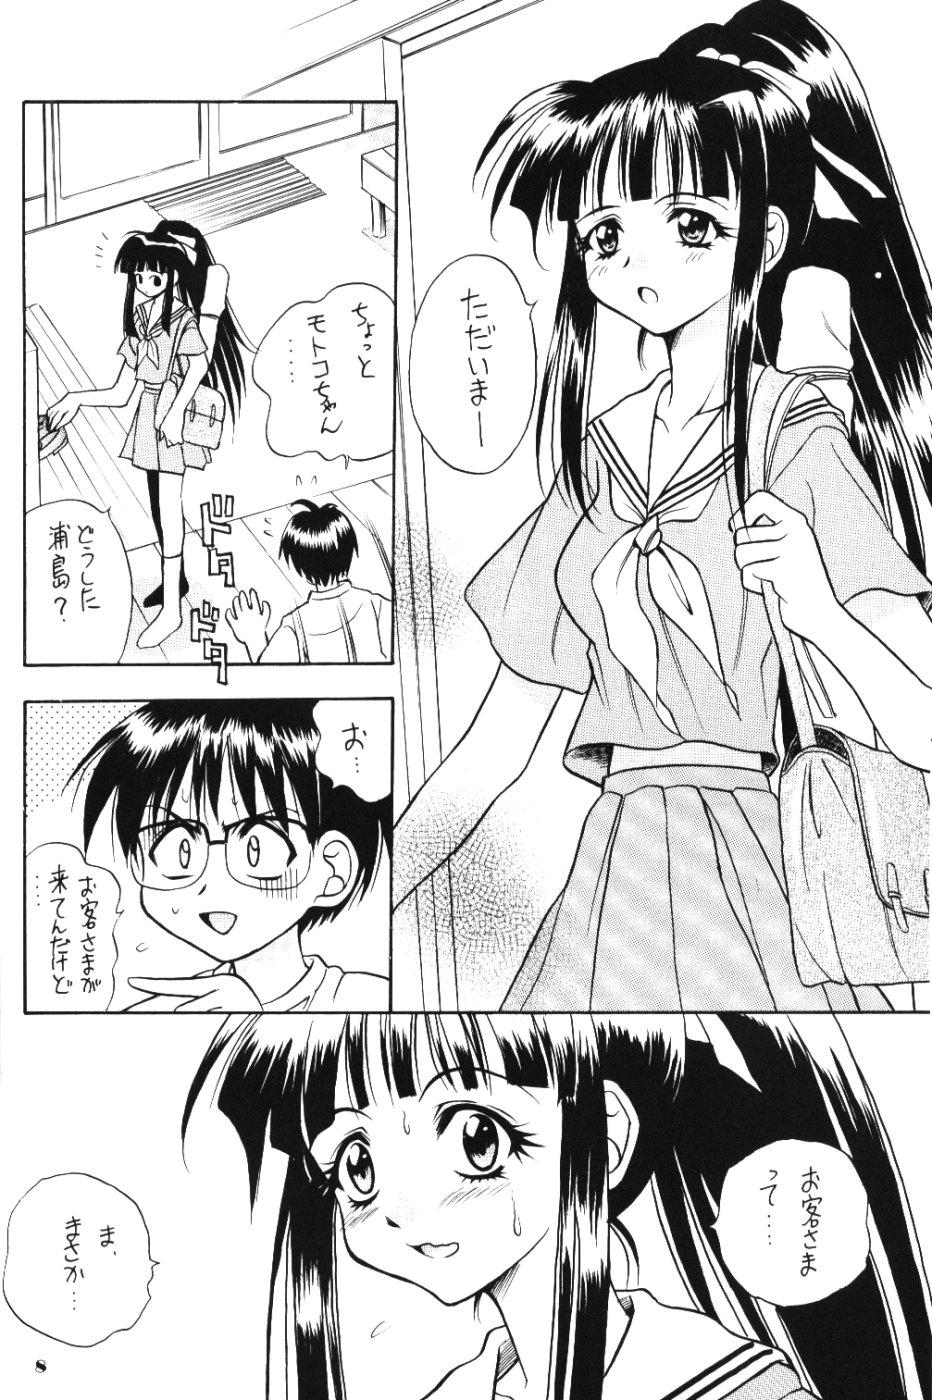 Sucks Lovely 3 - Love hina Large - Page 7